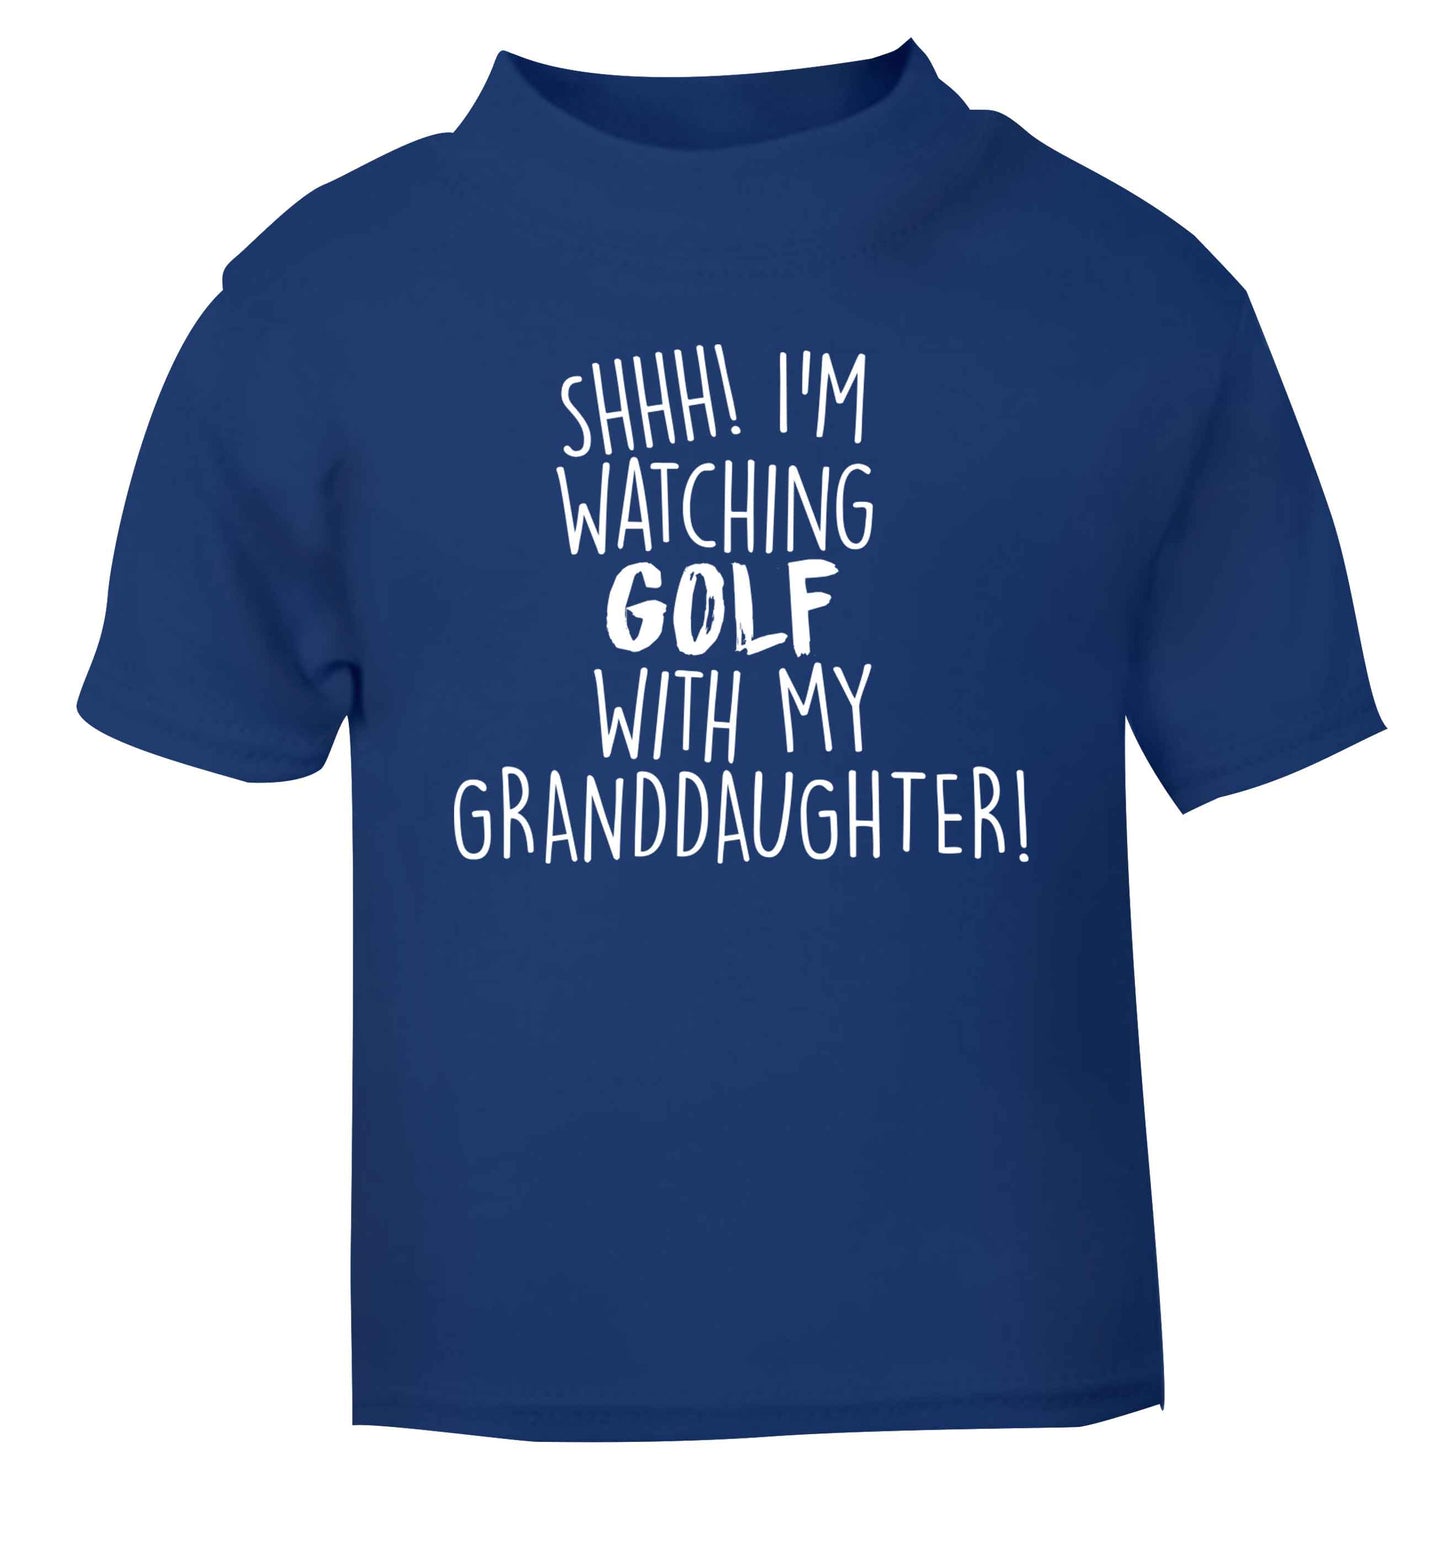 Shh I'm watching golf with my granddaughter blue Baby Toddler Tshirt 2 Years